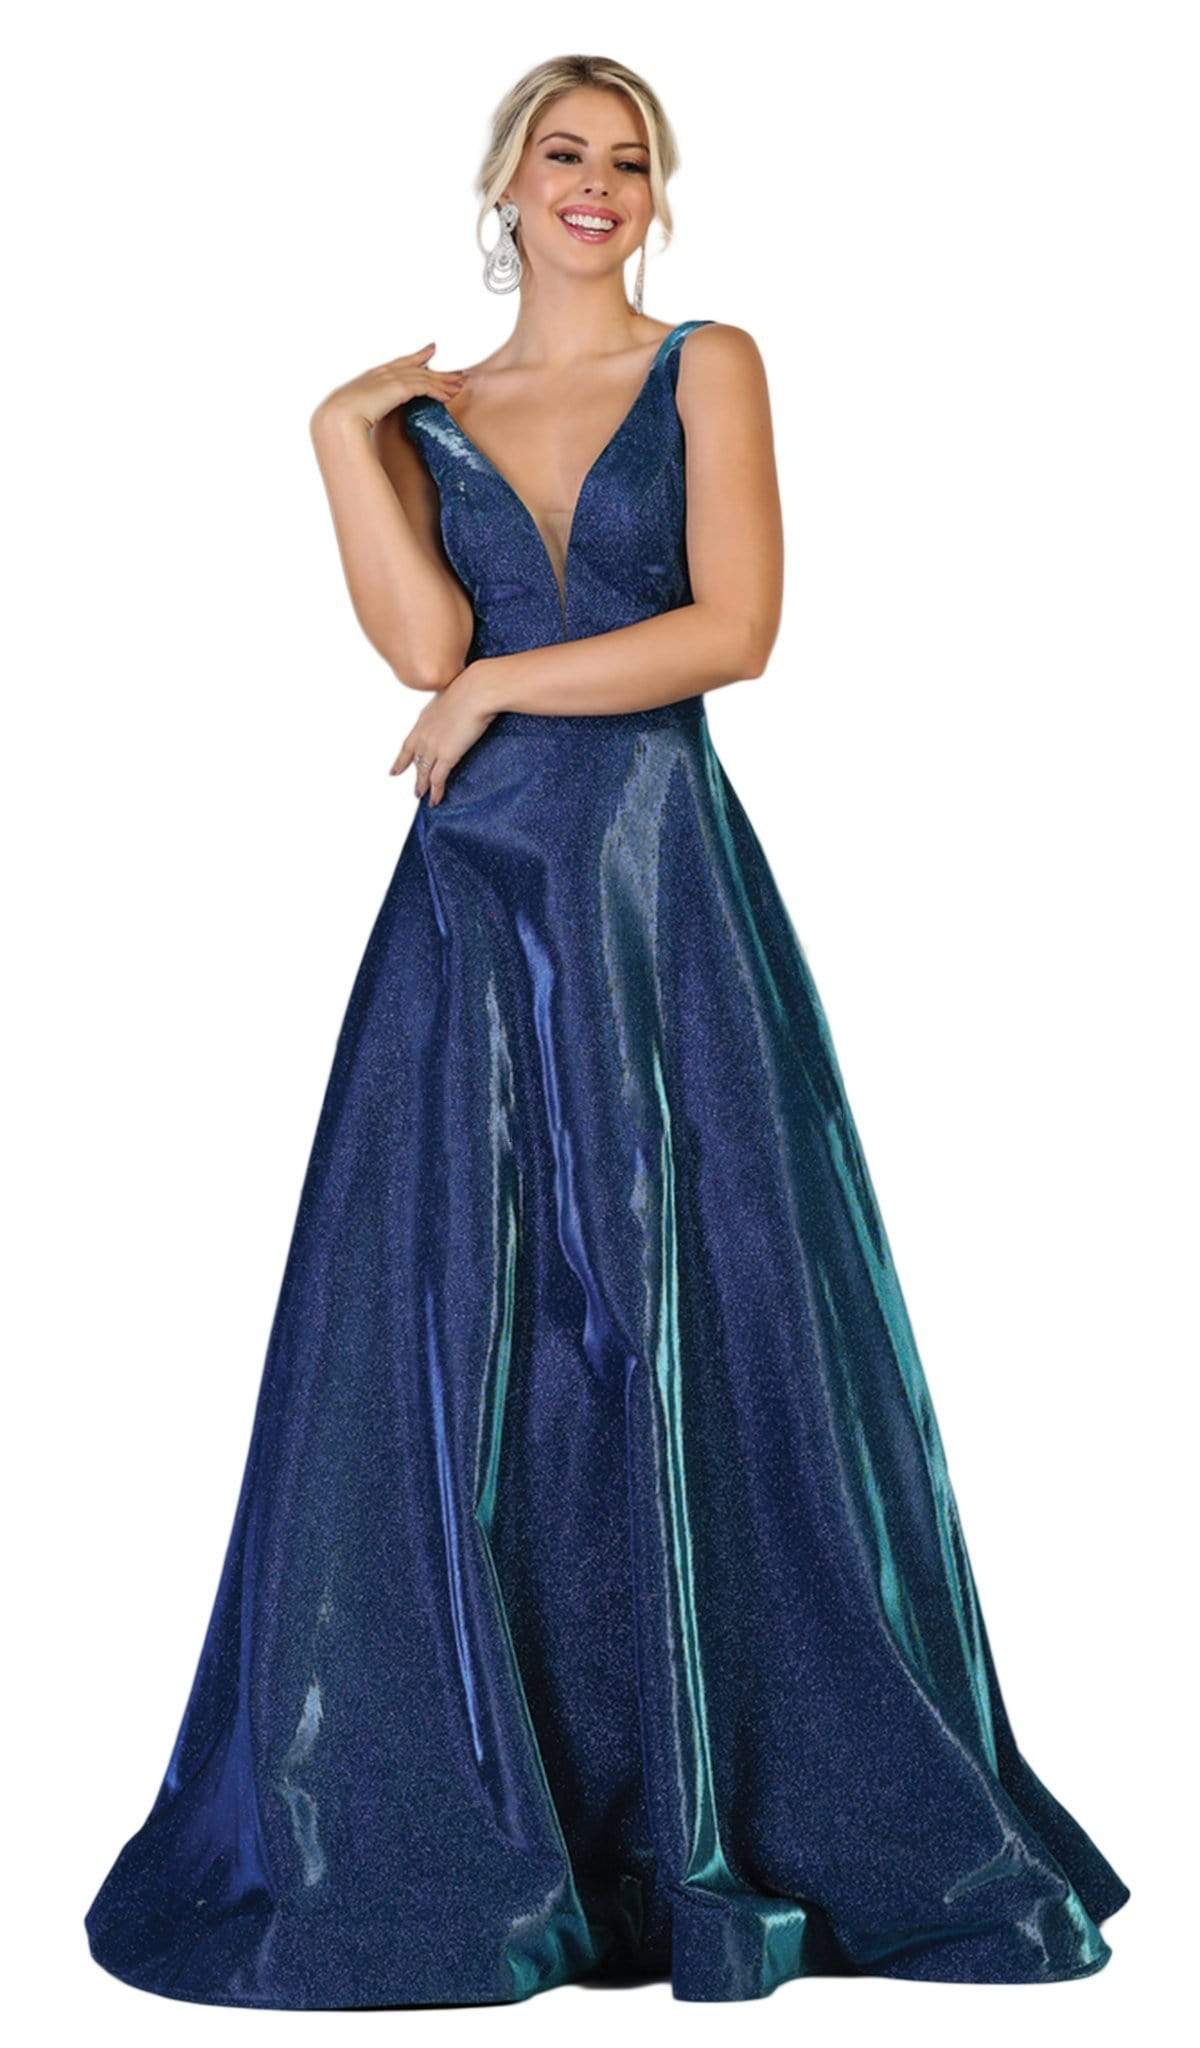 May Queen - RQ7755 Plunging V-Neck A-Line Evening Dress Evening Dresses 4 / Royal